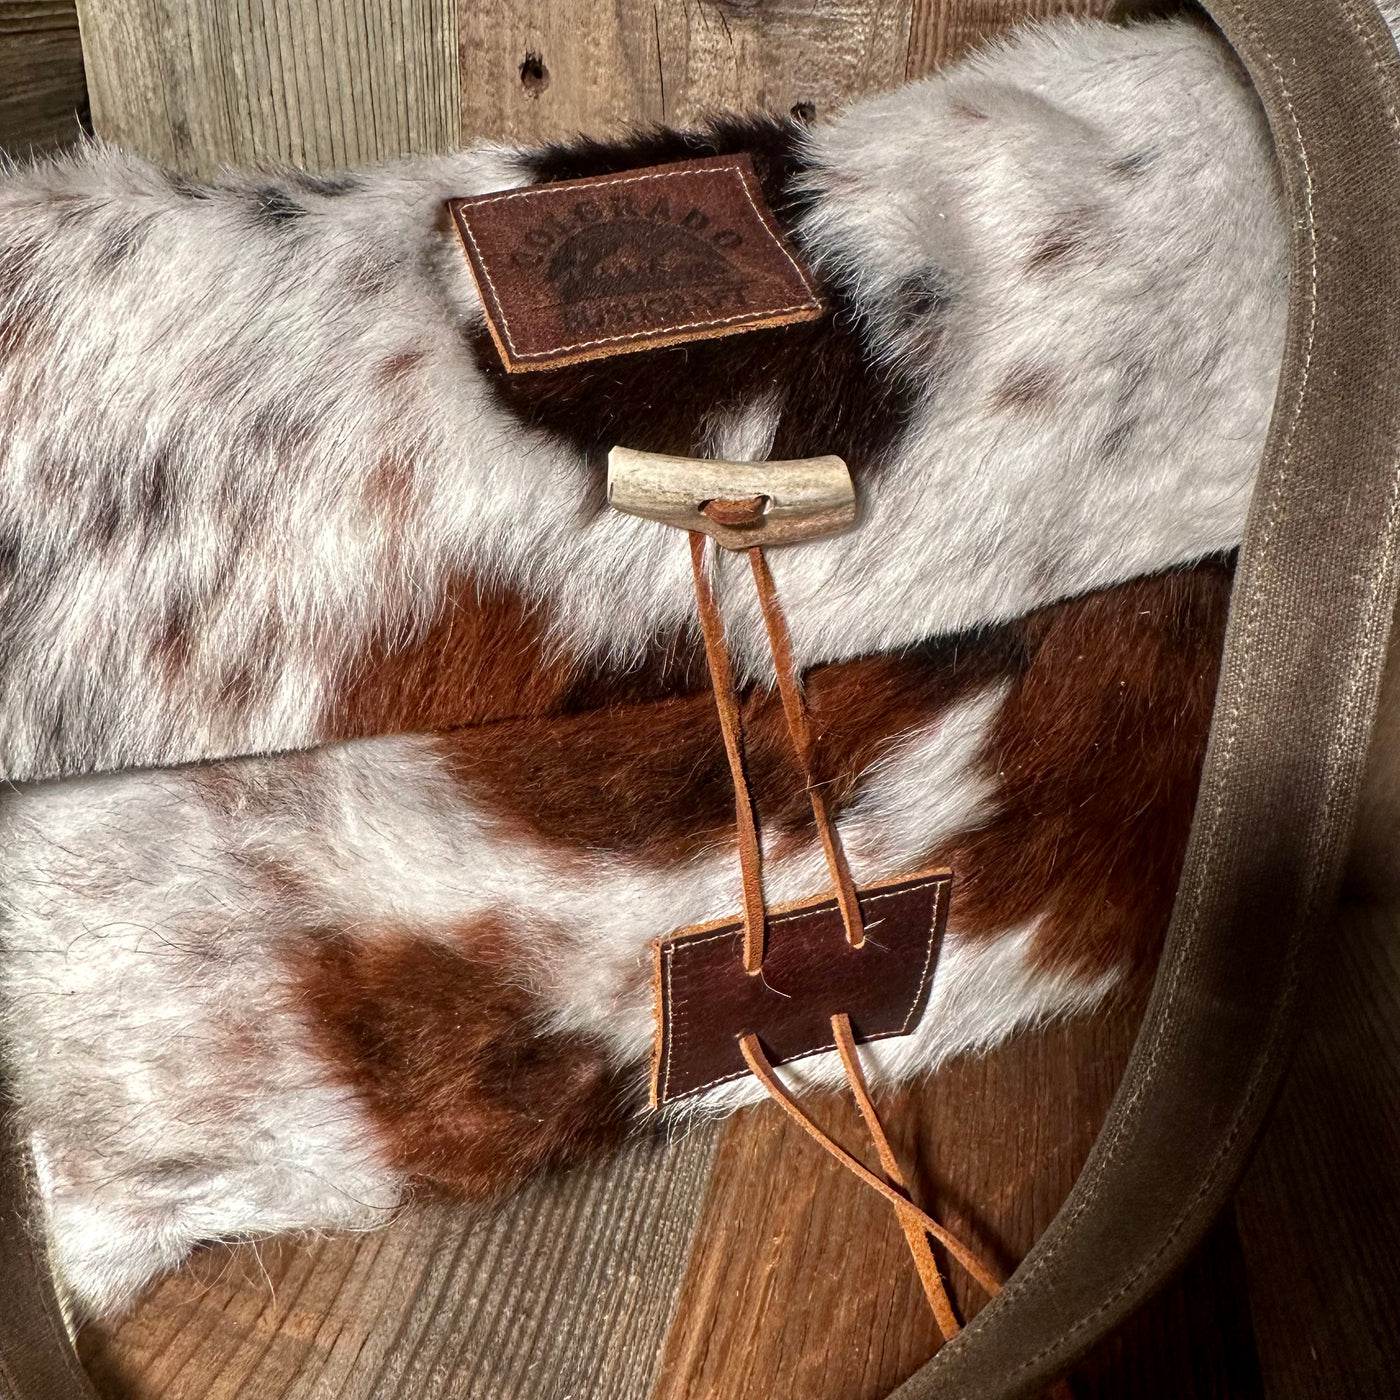 Handmade Hair-On Cowhide Bushcraft Mail Pouch Haversack Bag Foraging Hiking